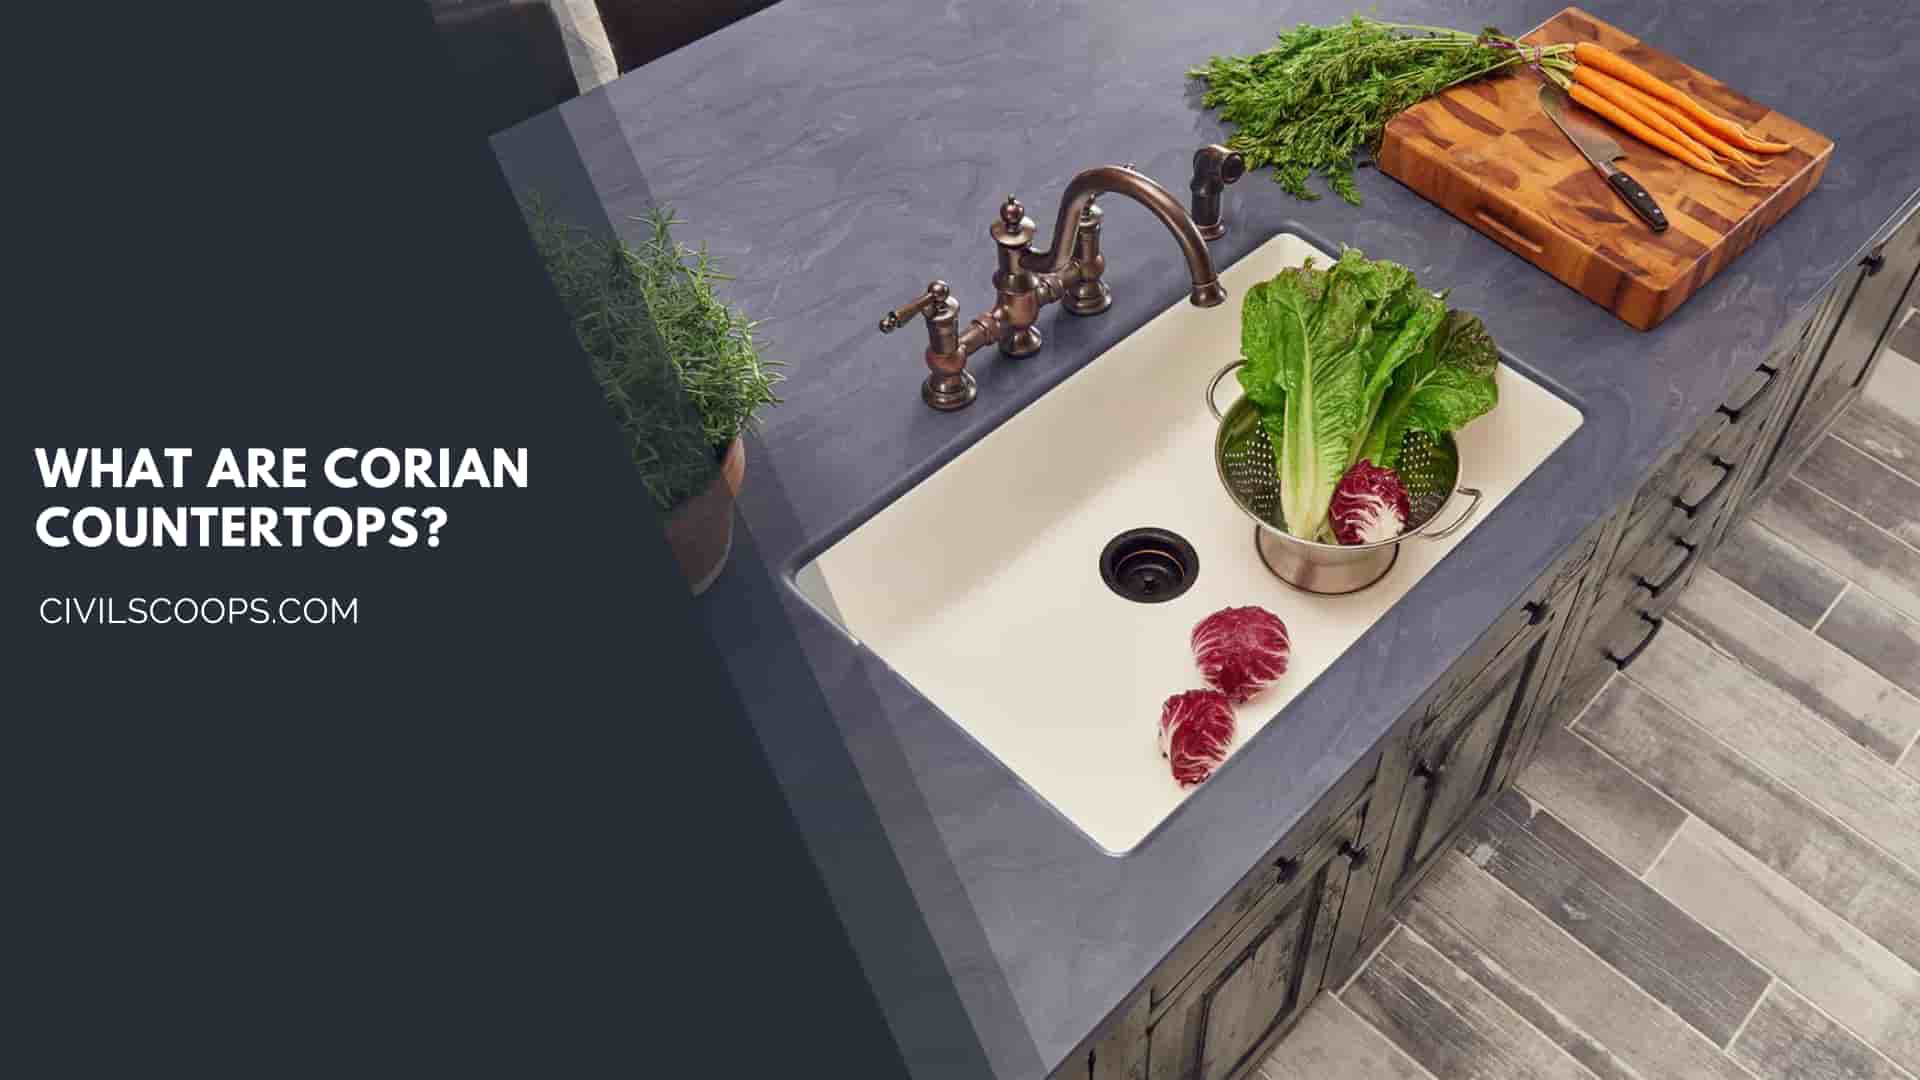 What Are Corian Countertops?